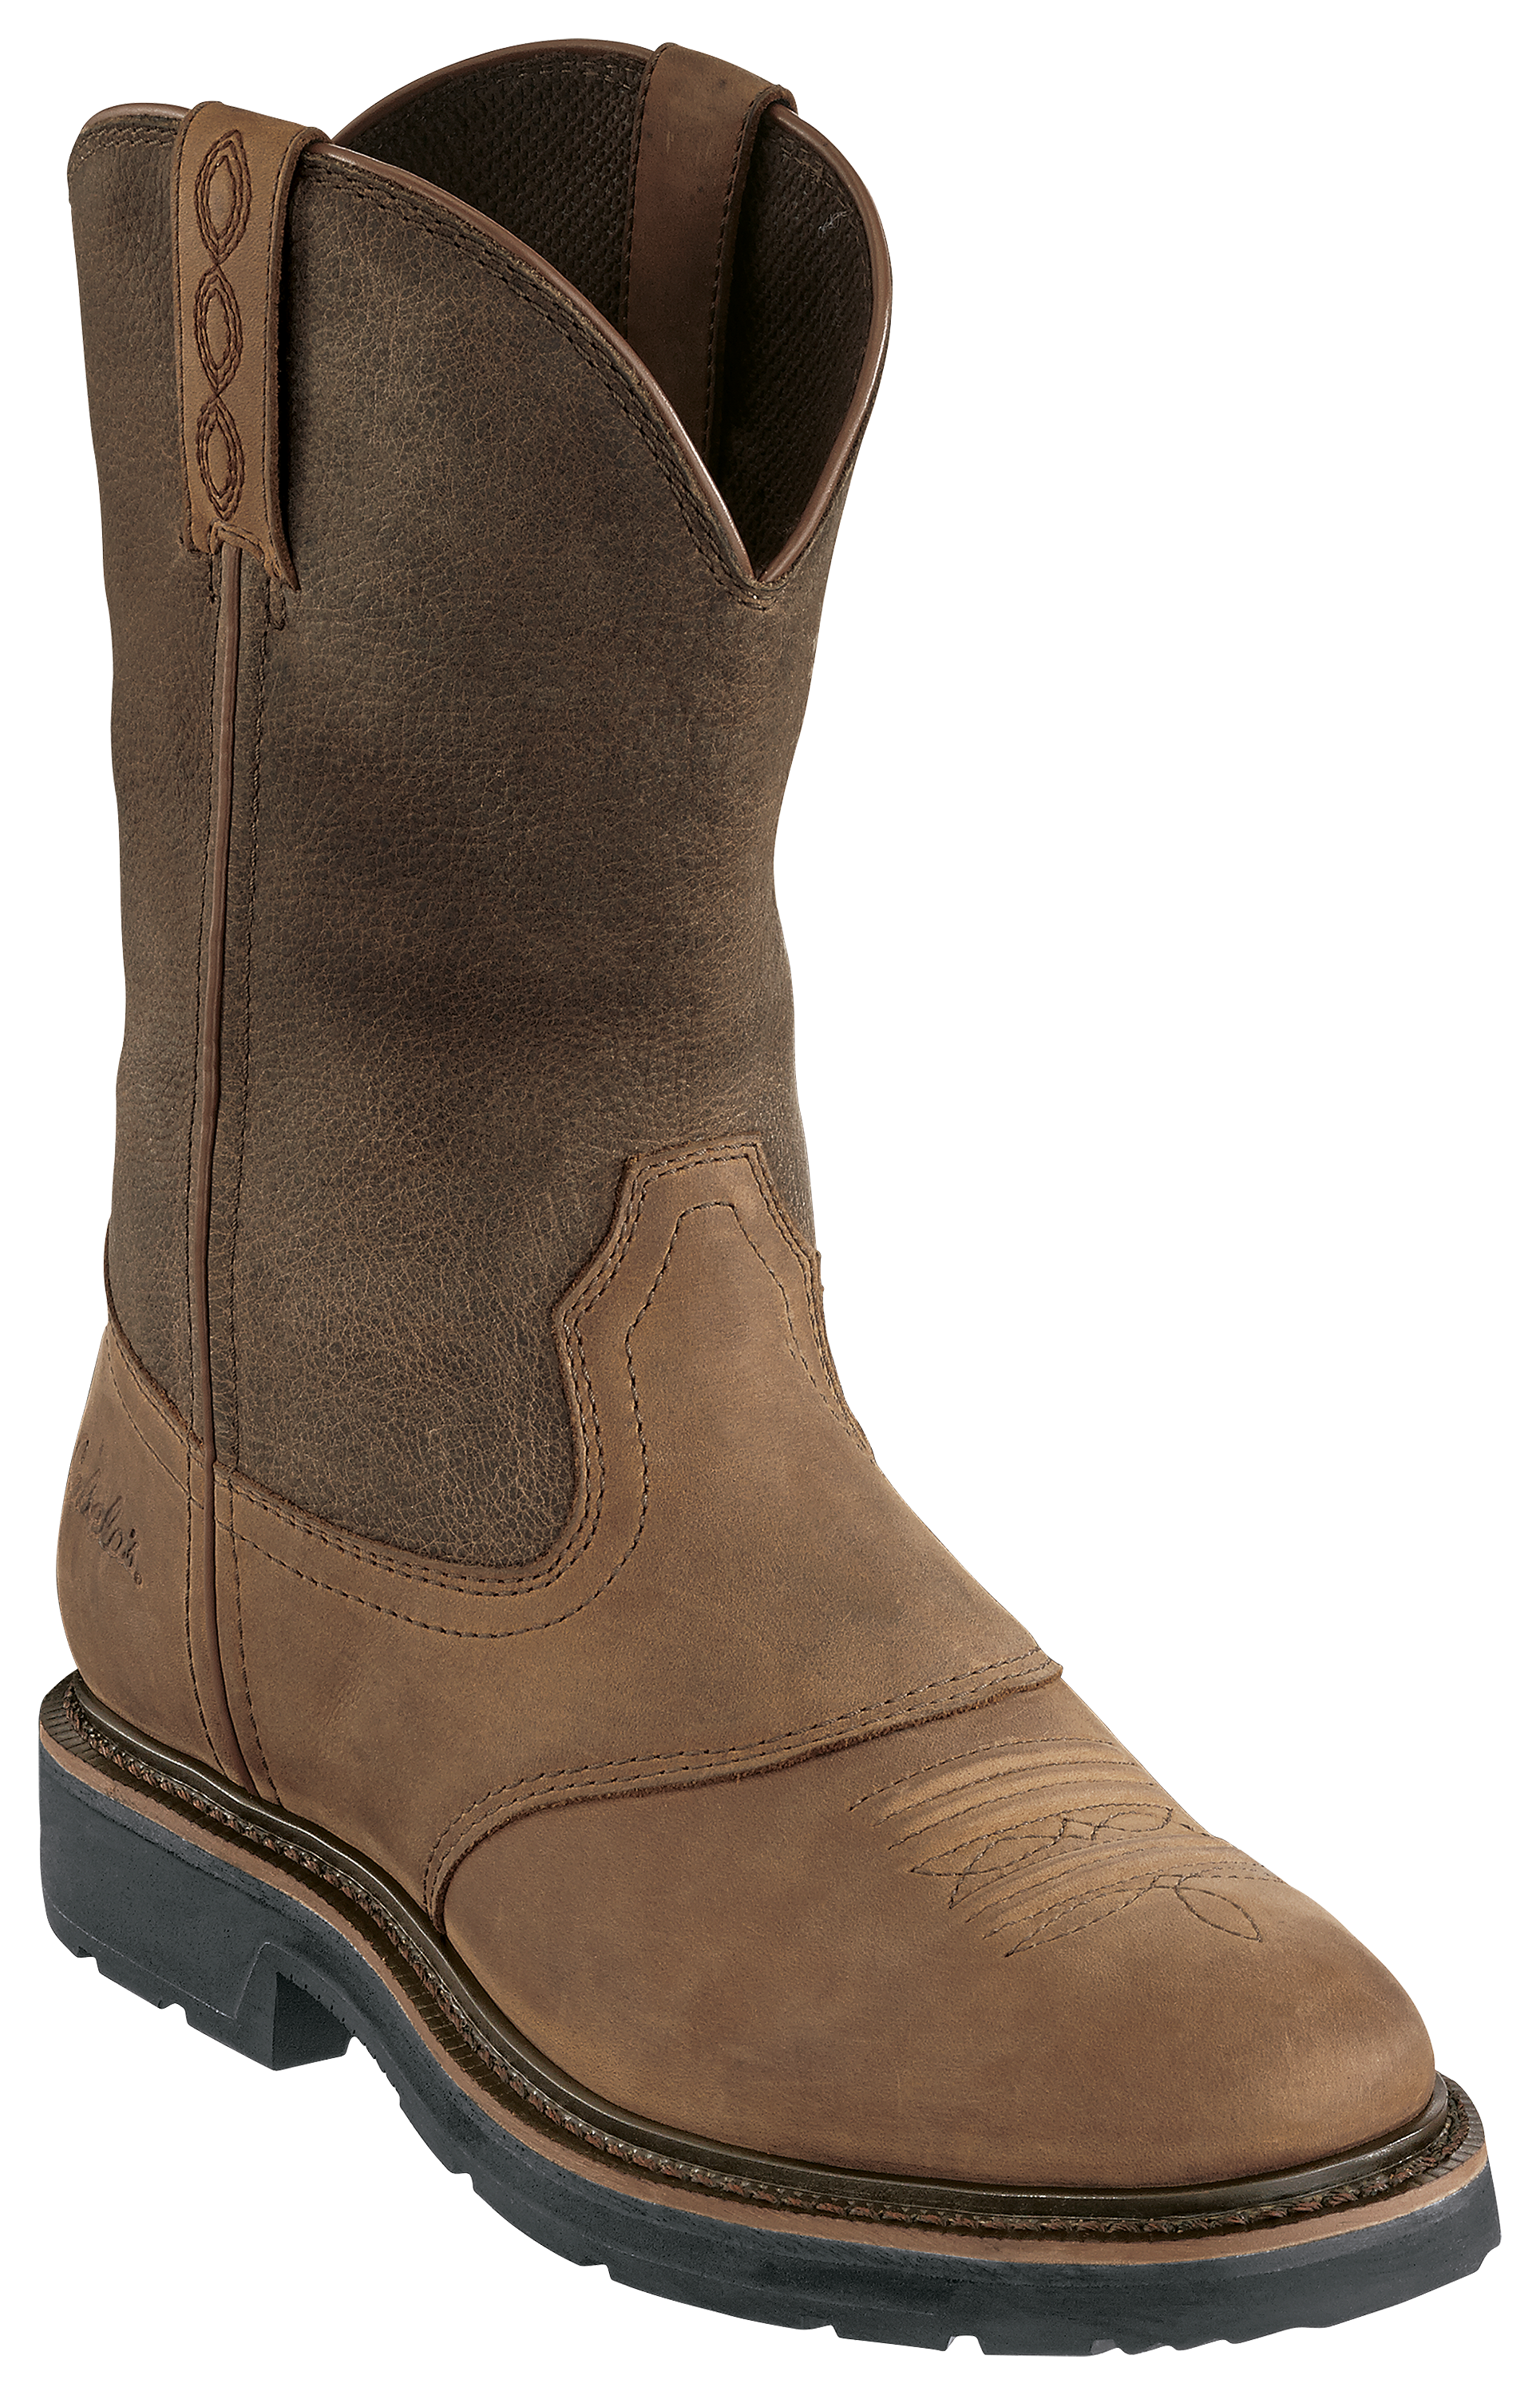 Cabela's Pinedale Western Work Boots for Men